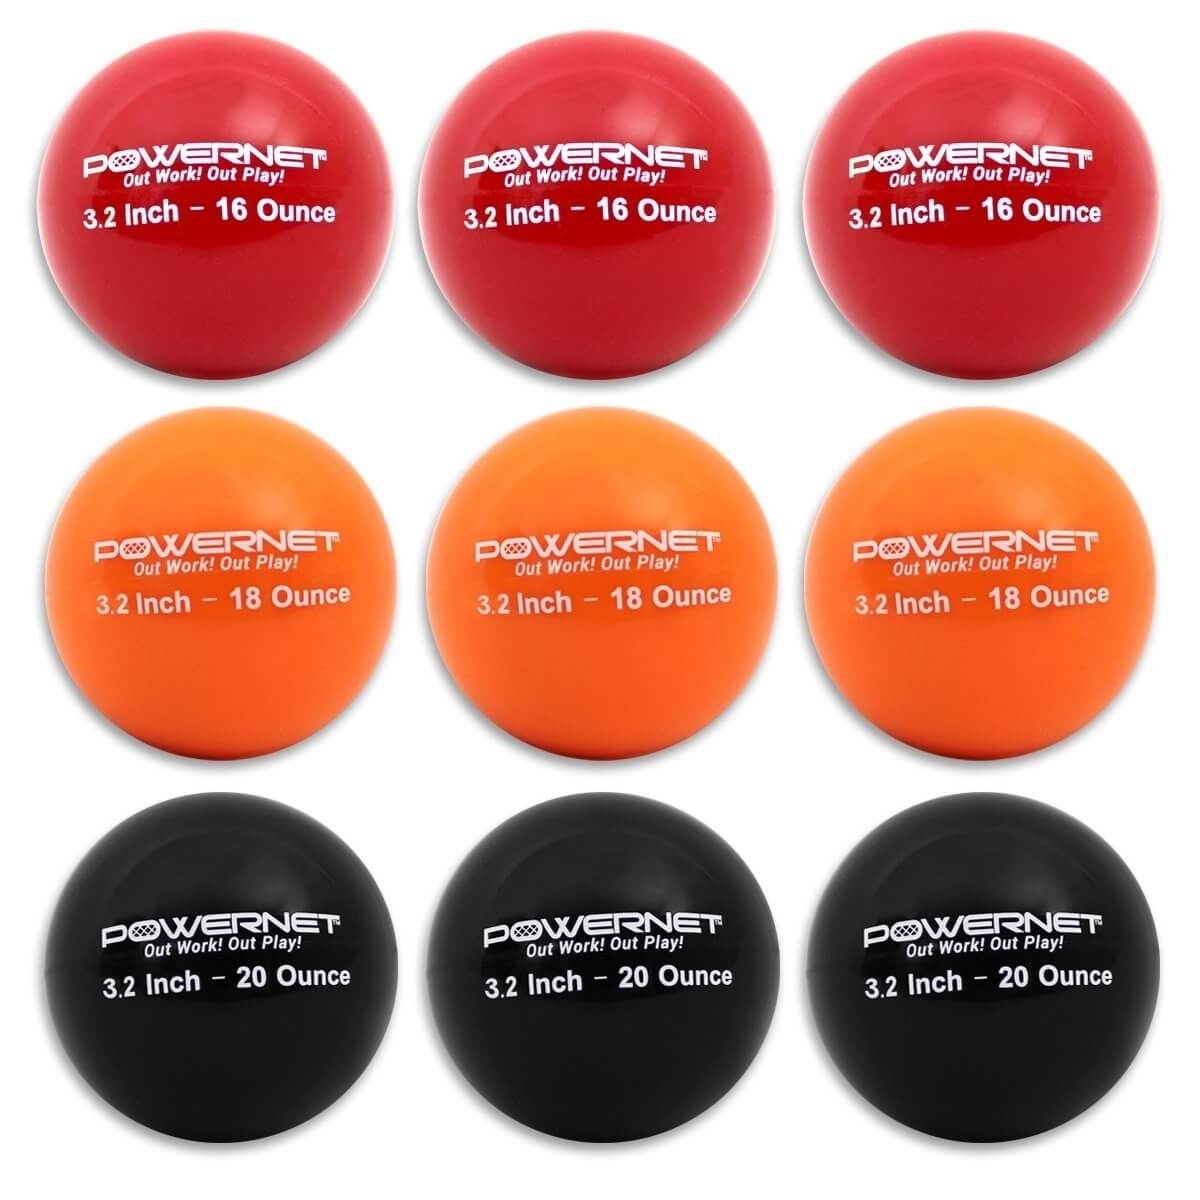 3.2 Weighted Hitting Batting Progressive Training Balls For Softball (9 Pack) - PRO Pack 3.2 , 16, 18, 20 Ounces